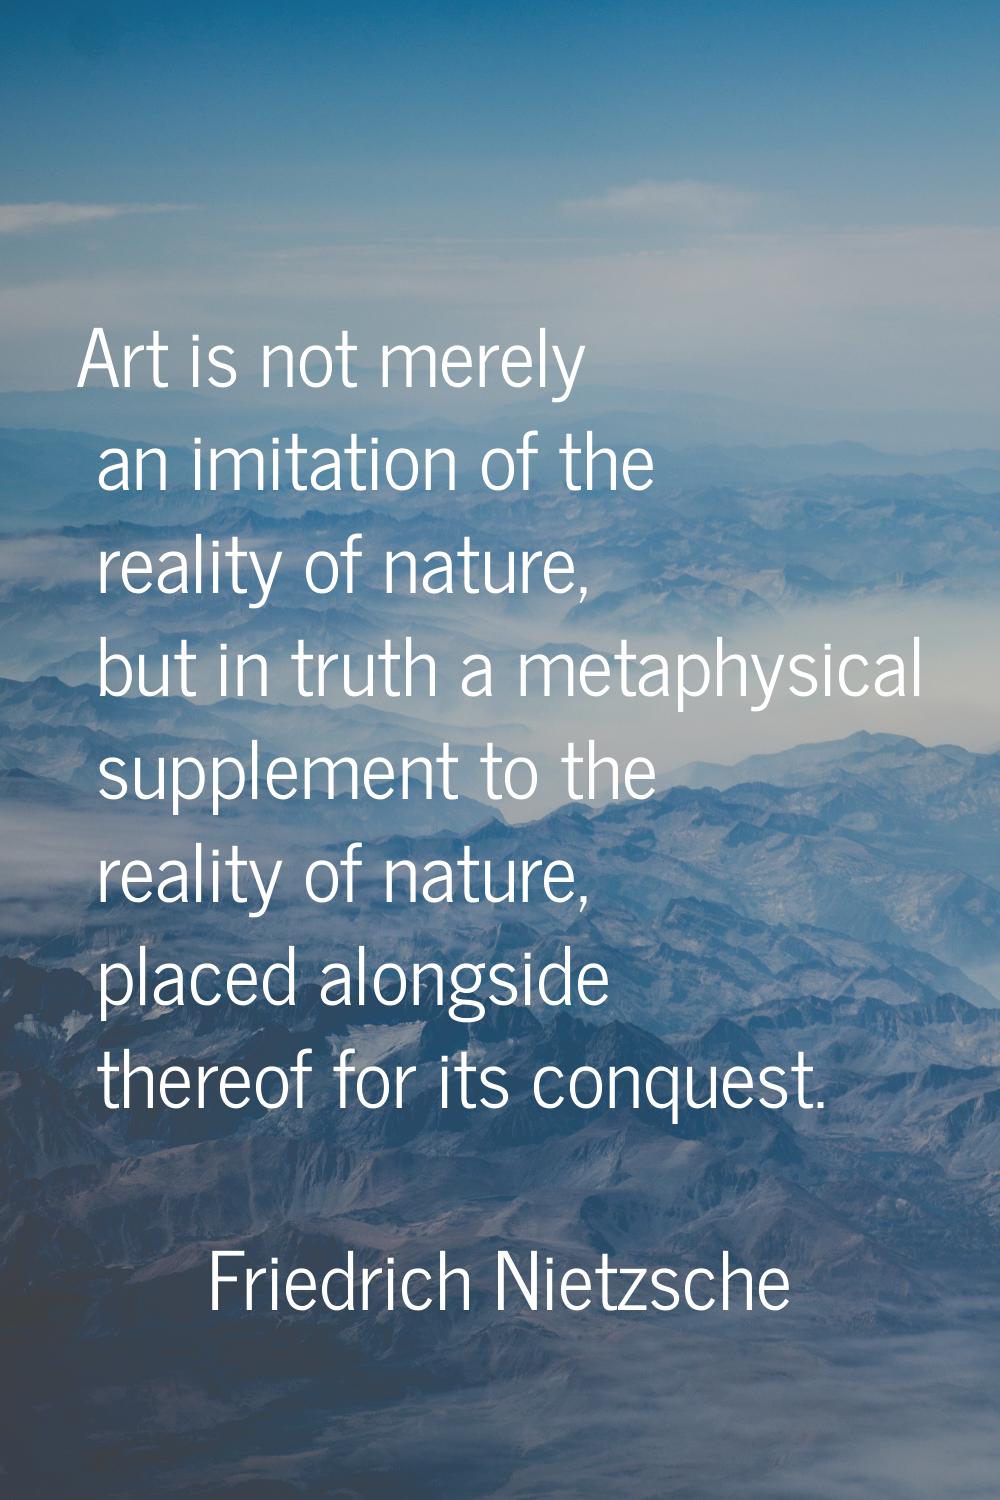 Art is not merely an imitation of the reality of nature, but in truth a metaphysical supplement to 